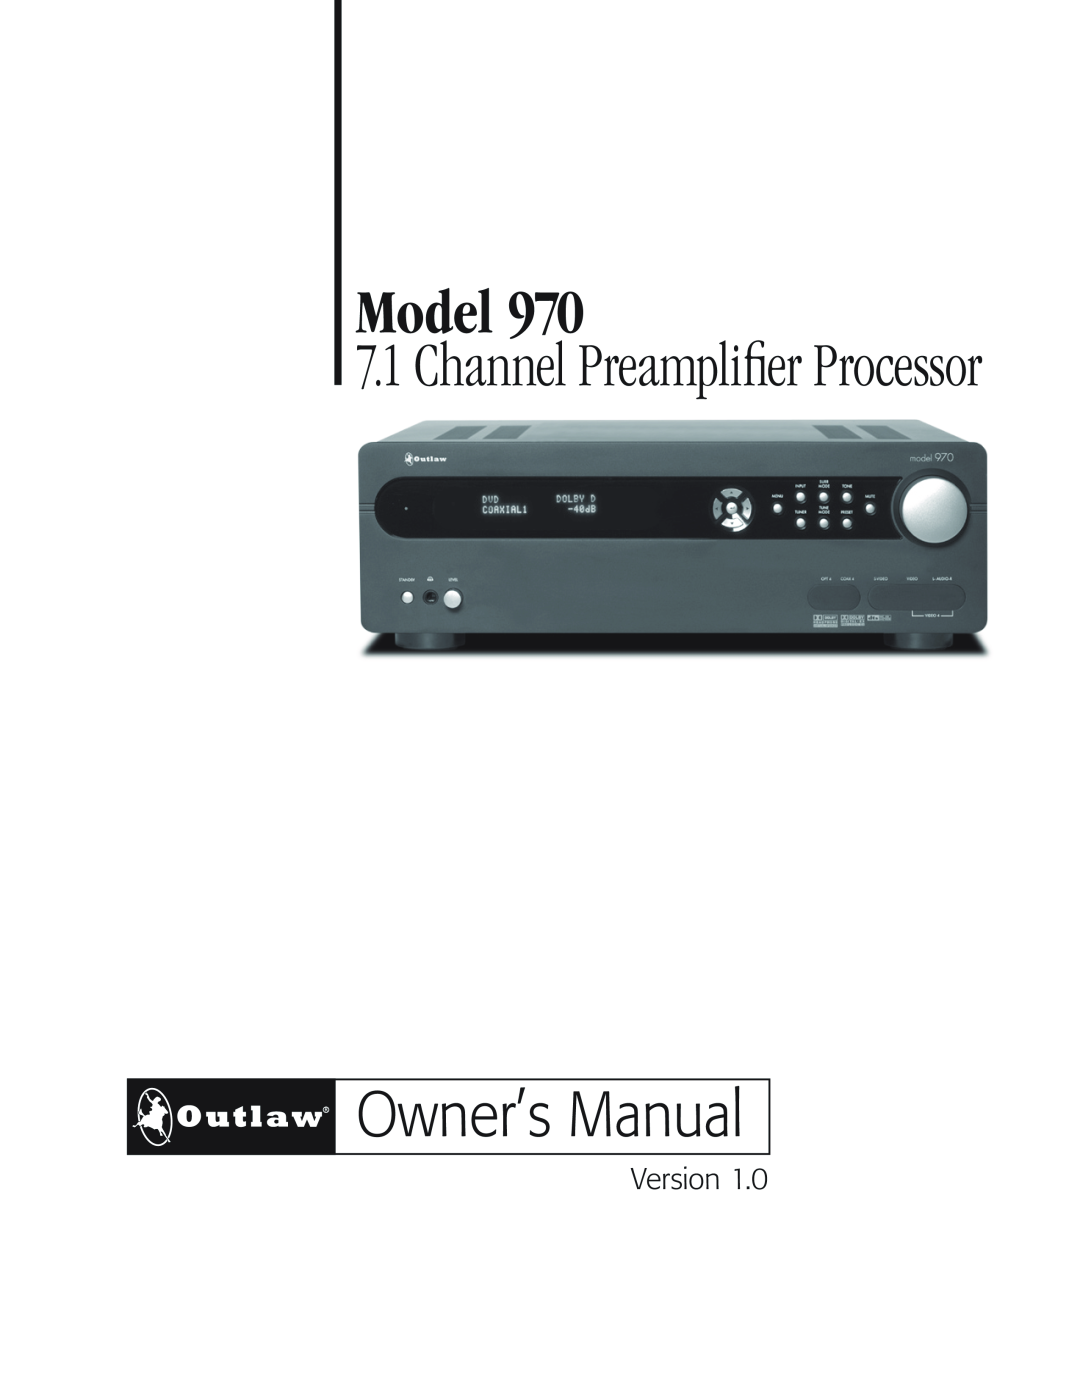 Outlaw Audio 970 owner manual Model, Channel Preamplifier Processor, Version 